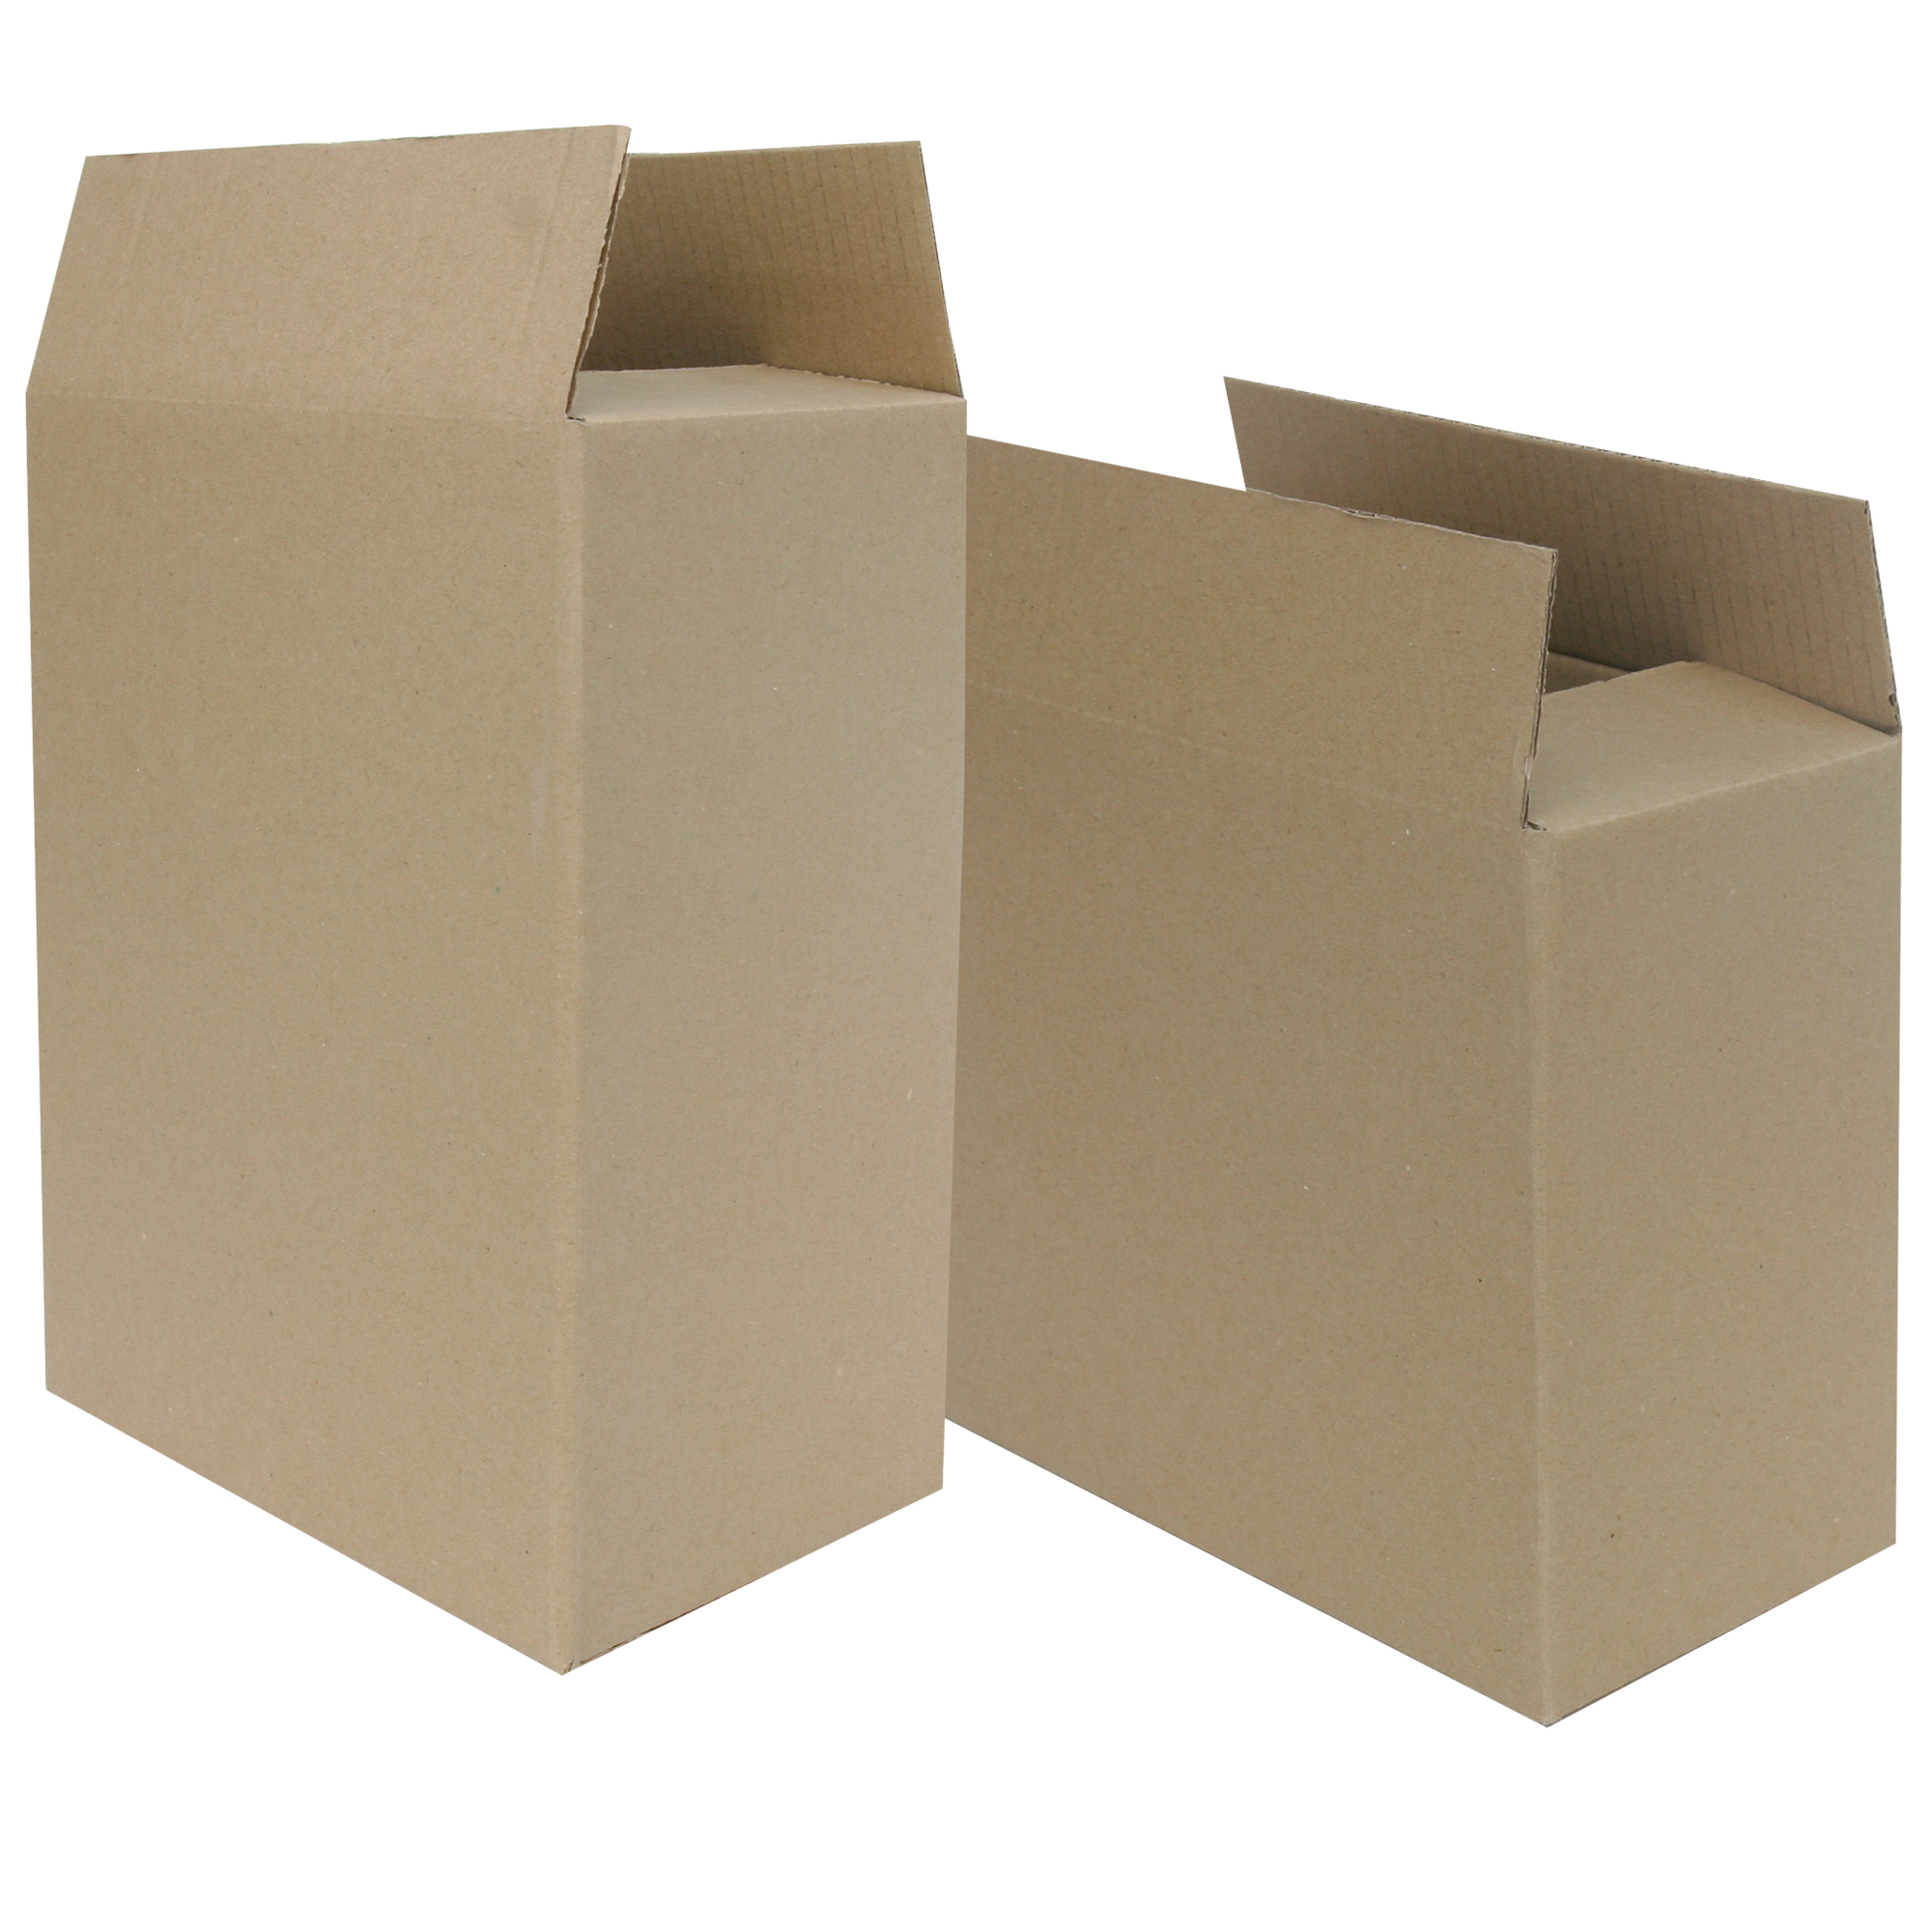 Birotics and Stationary/Stationery and Office Supplies/Cardboard Boxes